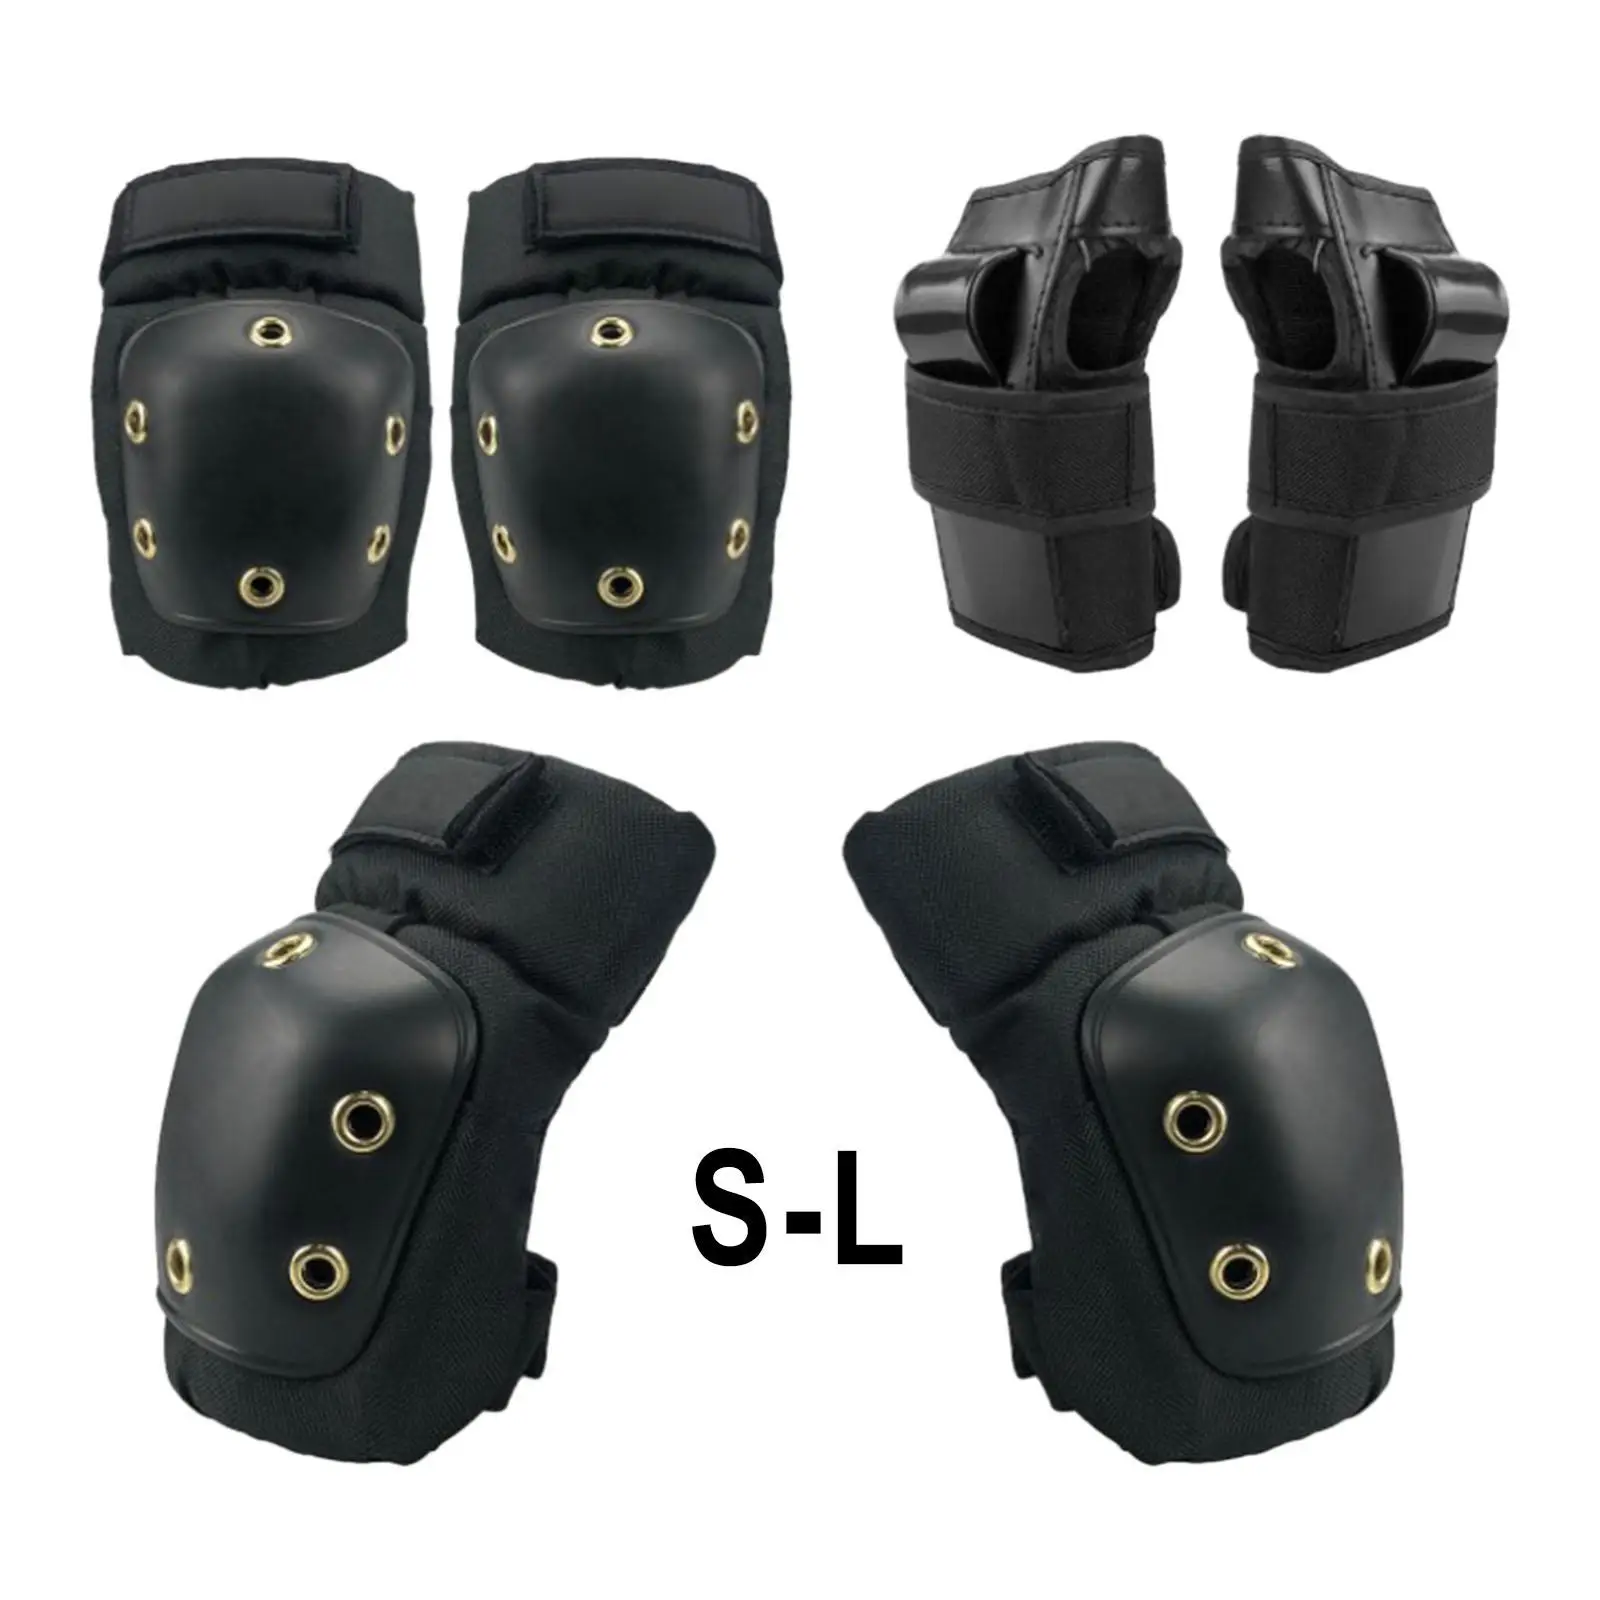 Kids Child Teens Outdoor Sports Protective Gear Knee Elbow Pad Riding Wrist Guards Roller Skating Skateboard Protection